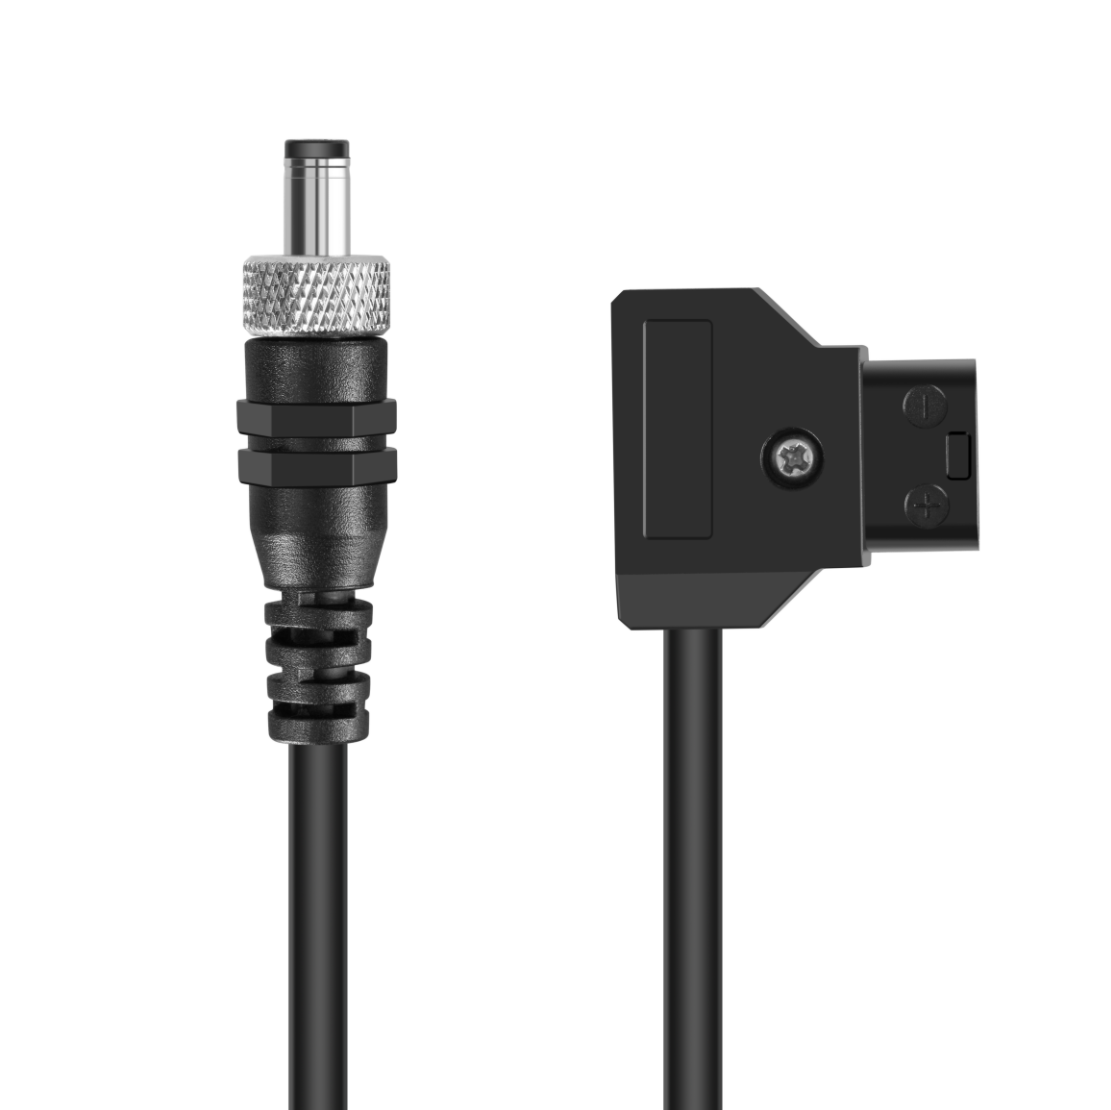 HL-DT02 D-TAP to DC 2.1 Power Supply Cable